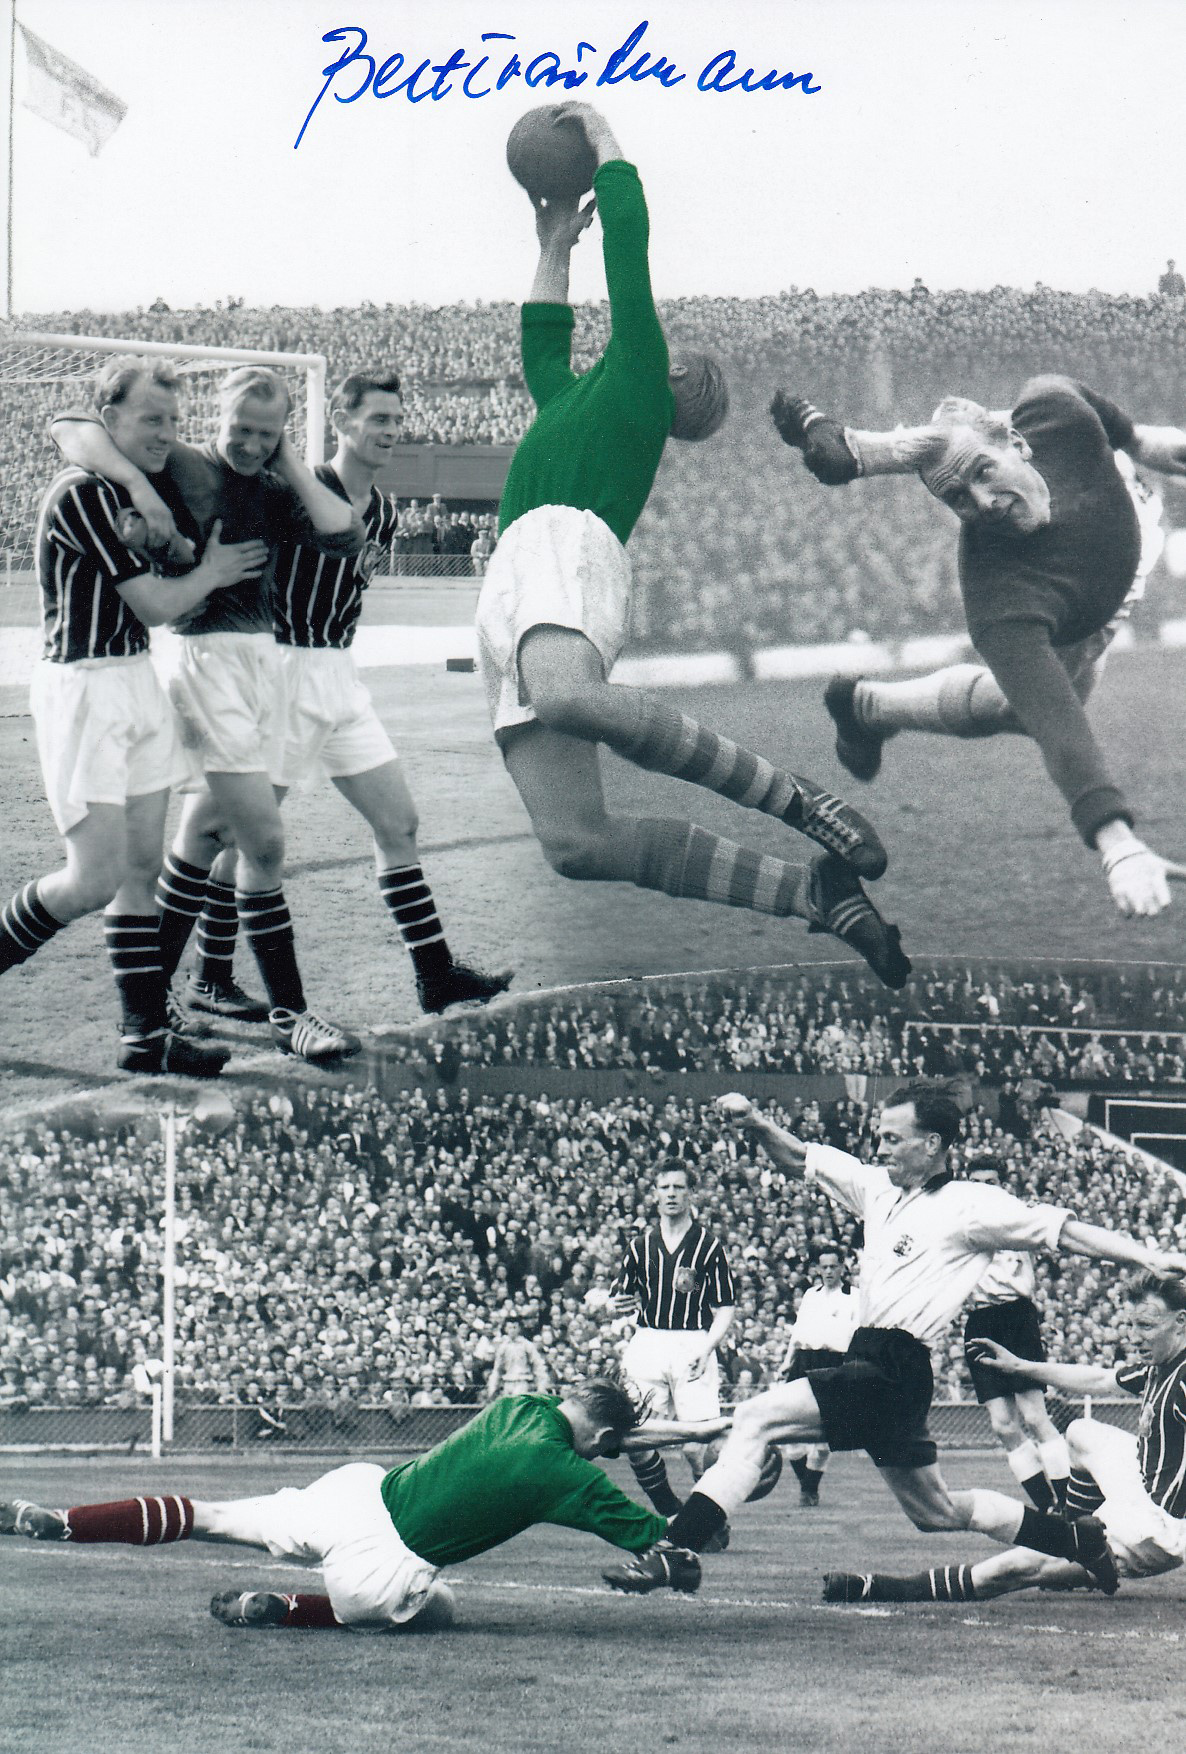 Autographed BERT TRAUTMANN 12 x 8 photo - Colorized, depicting a montage of images relating to the